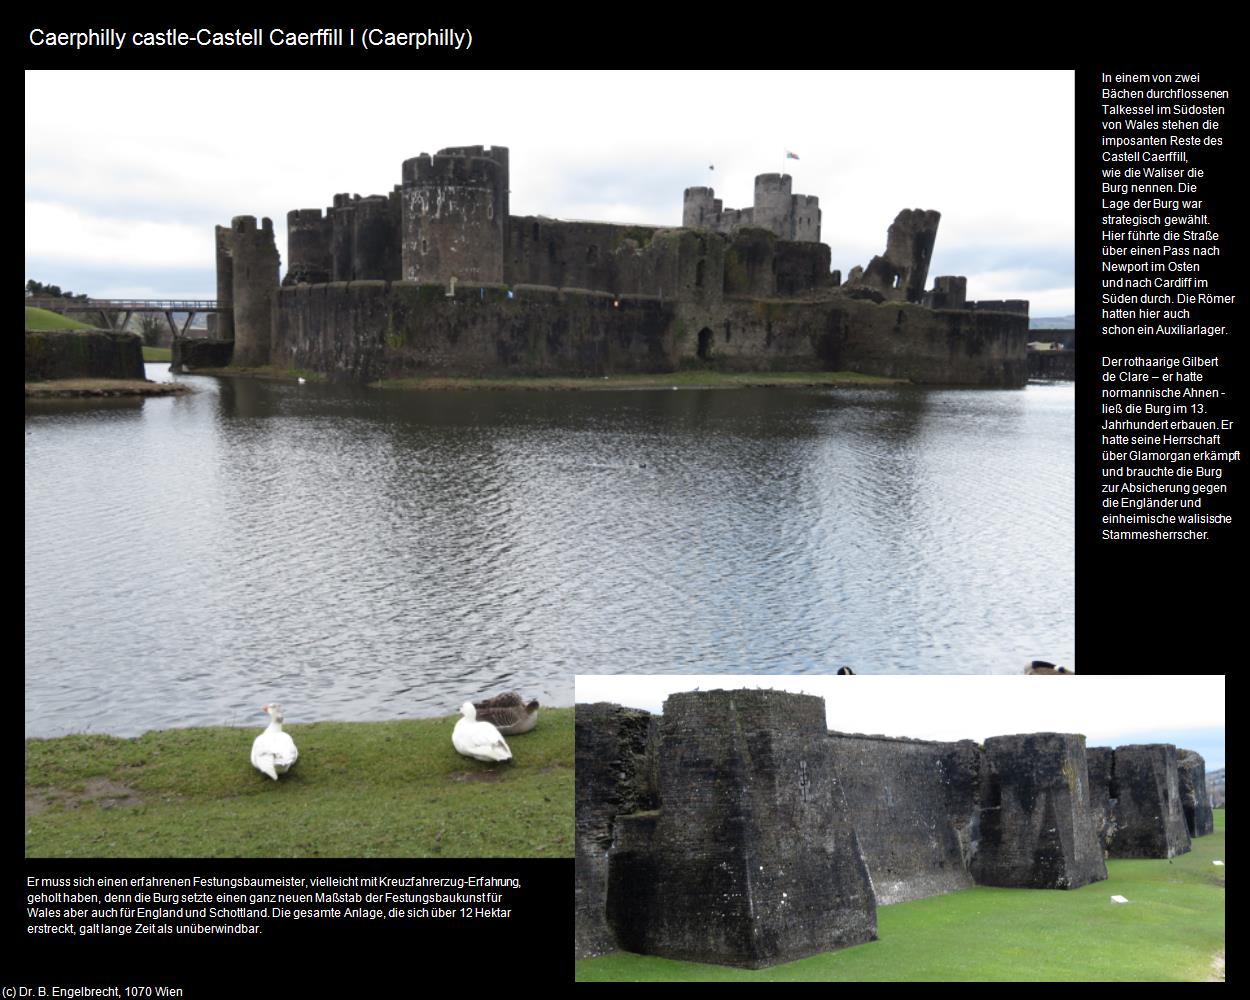 Caerphilly castle I (Caerphilly, Wales) in Kulturatlas-ENGLAND und WALES